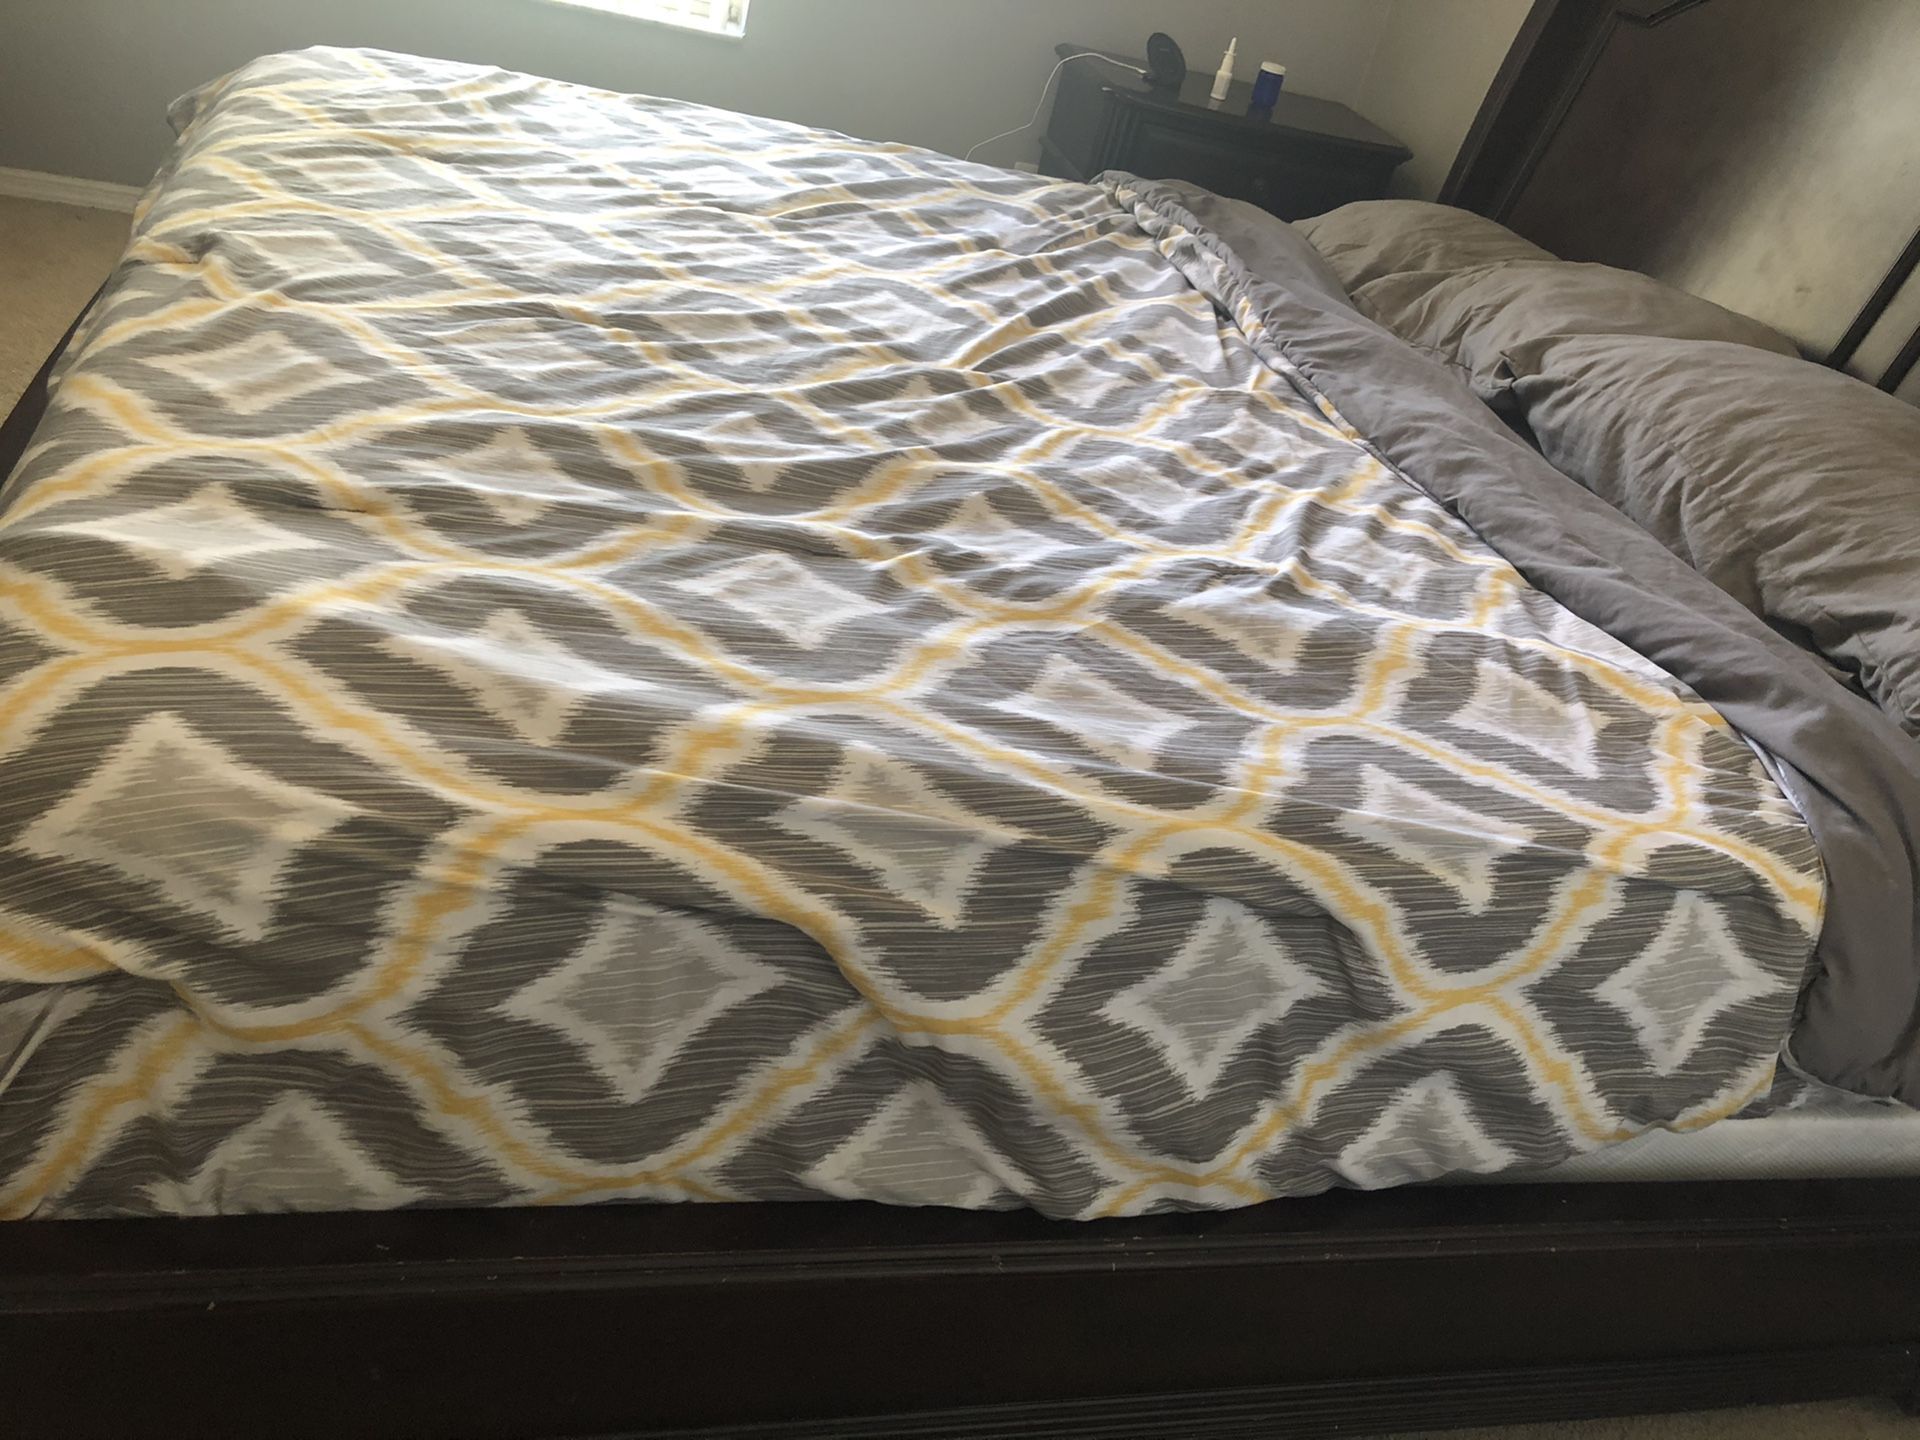 King bed frame ( not include the mattress )